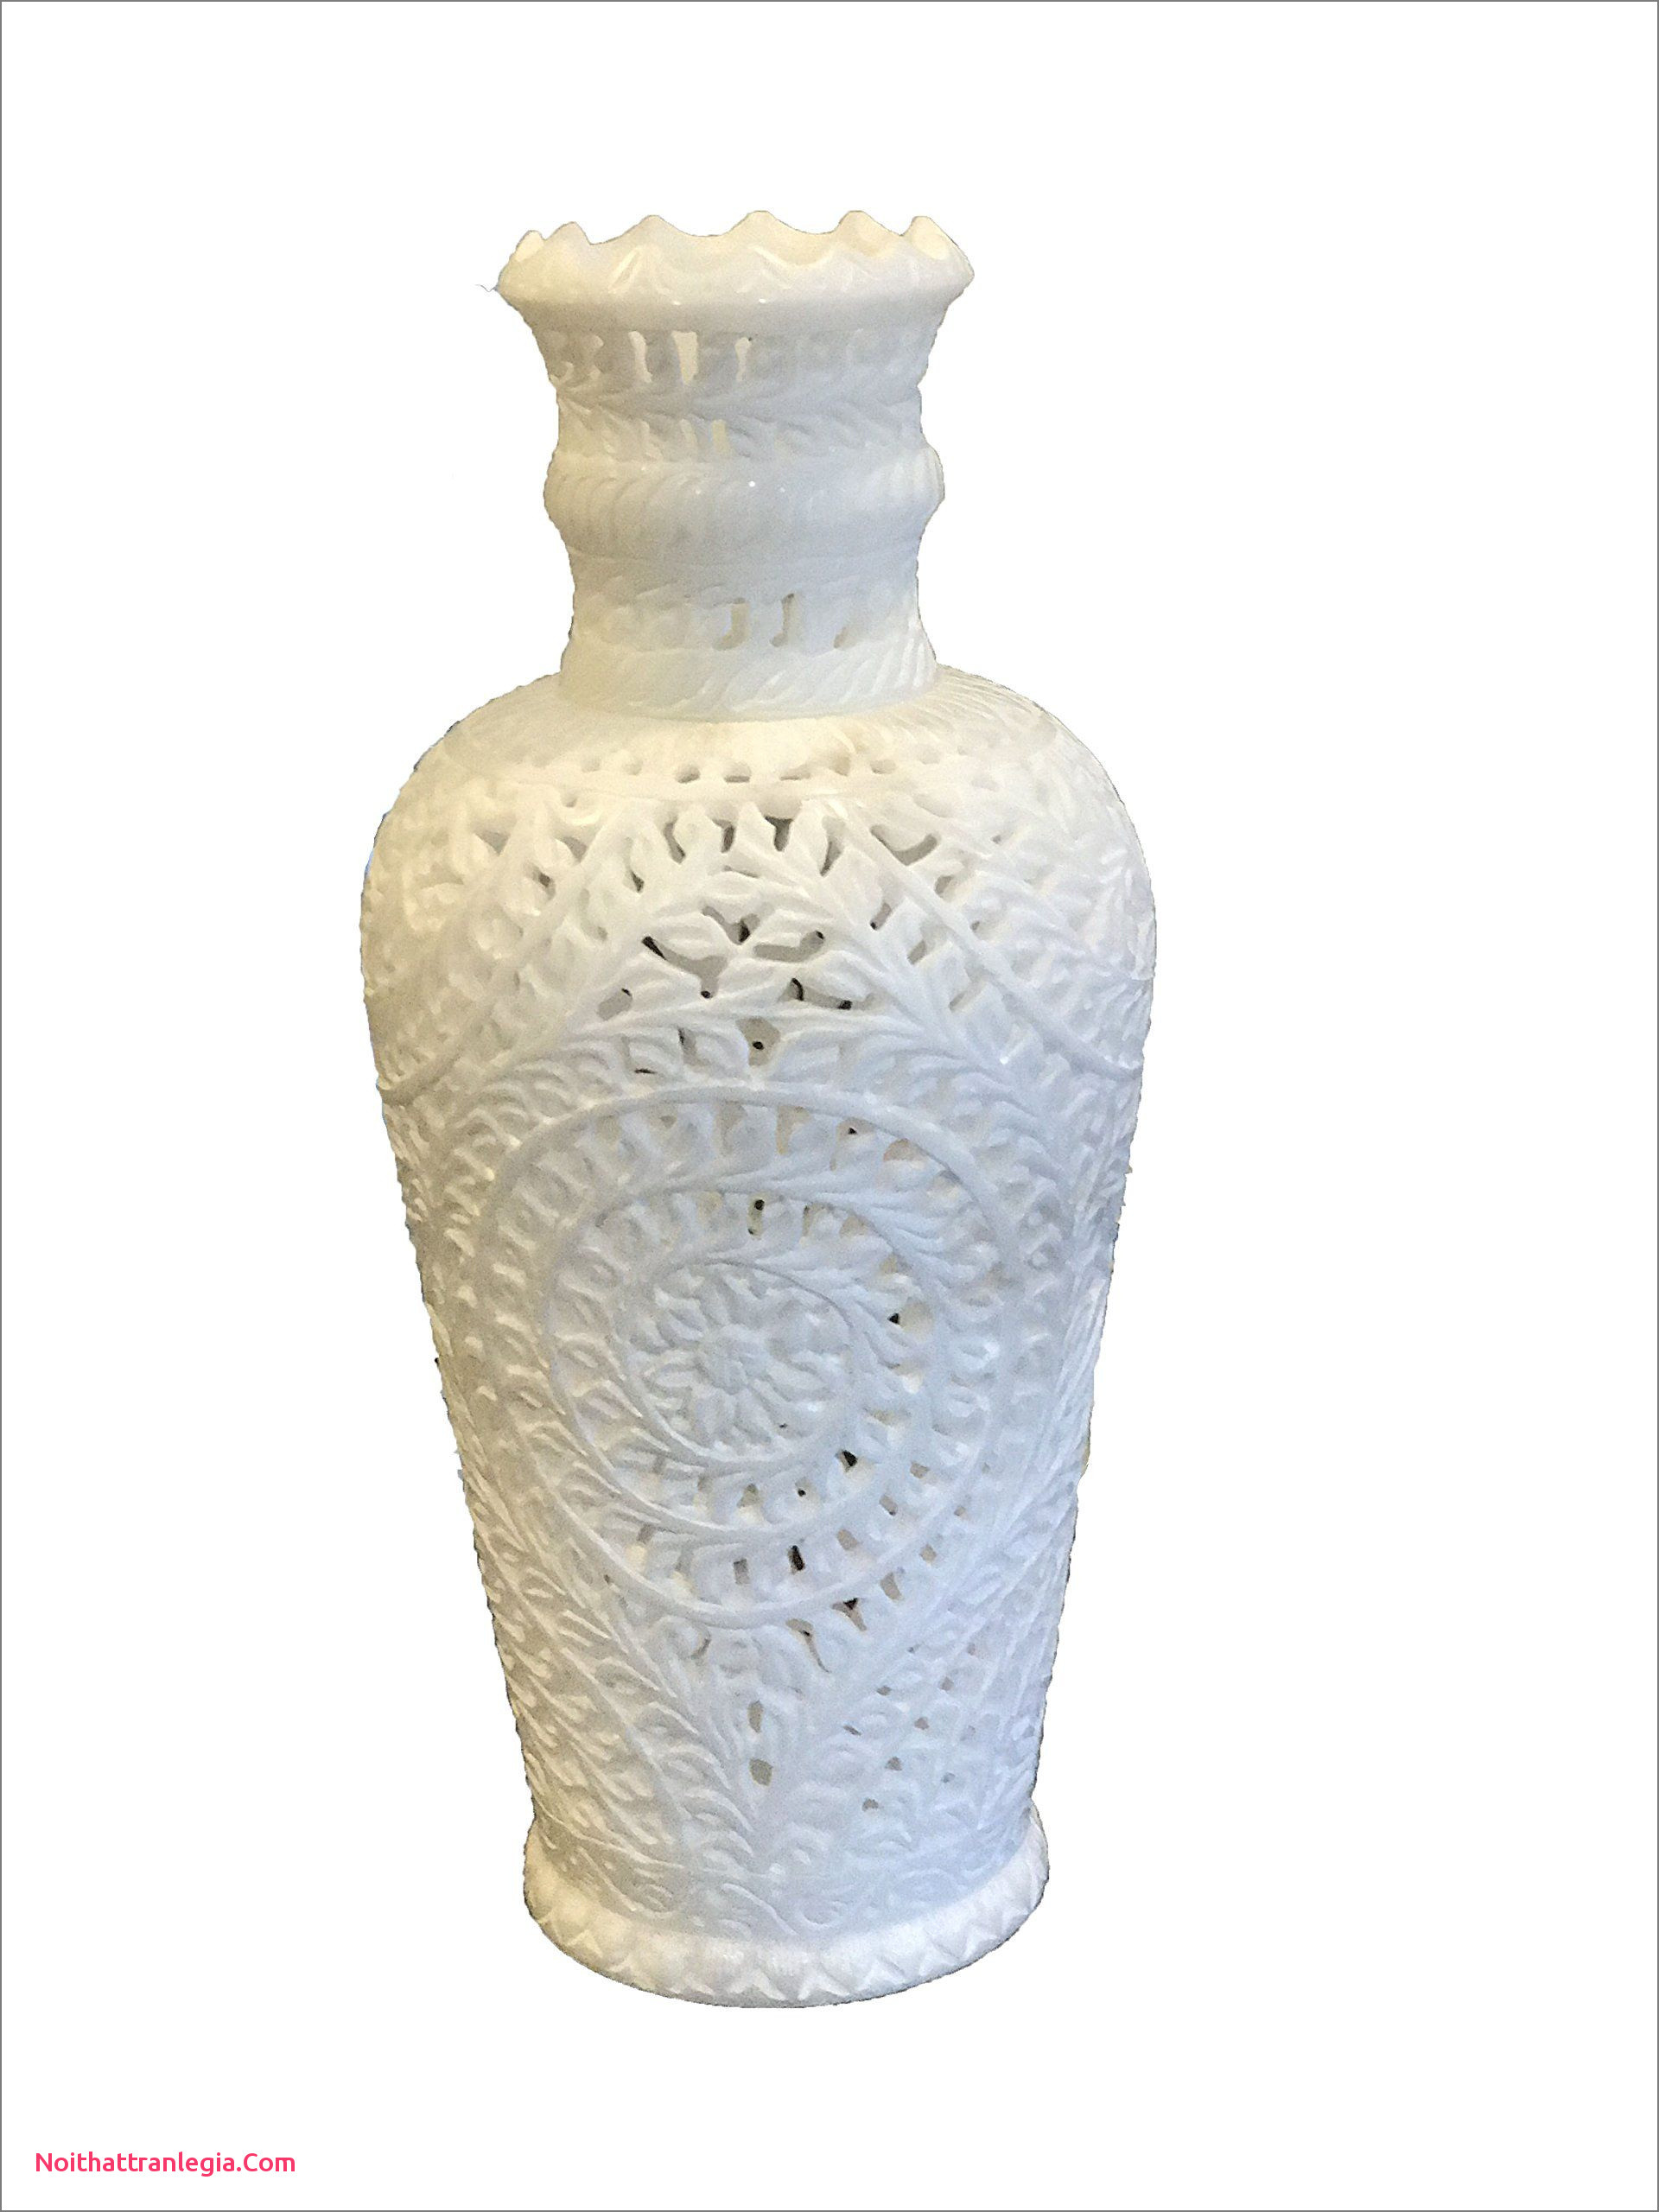 cheap plastic vases of 20 how to clean flower vases noithattranlegia vases design with regard to white marble flower vase handcrafted stone decorative wedding diy vases handcrafted by artisans this